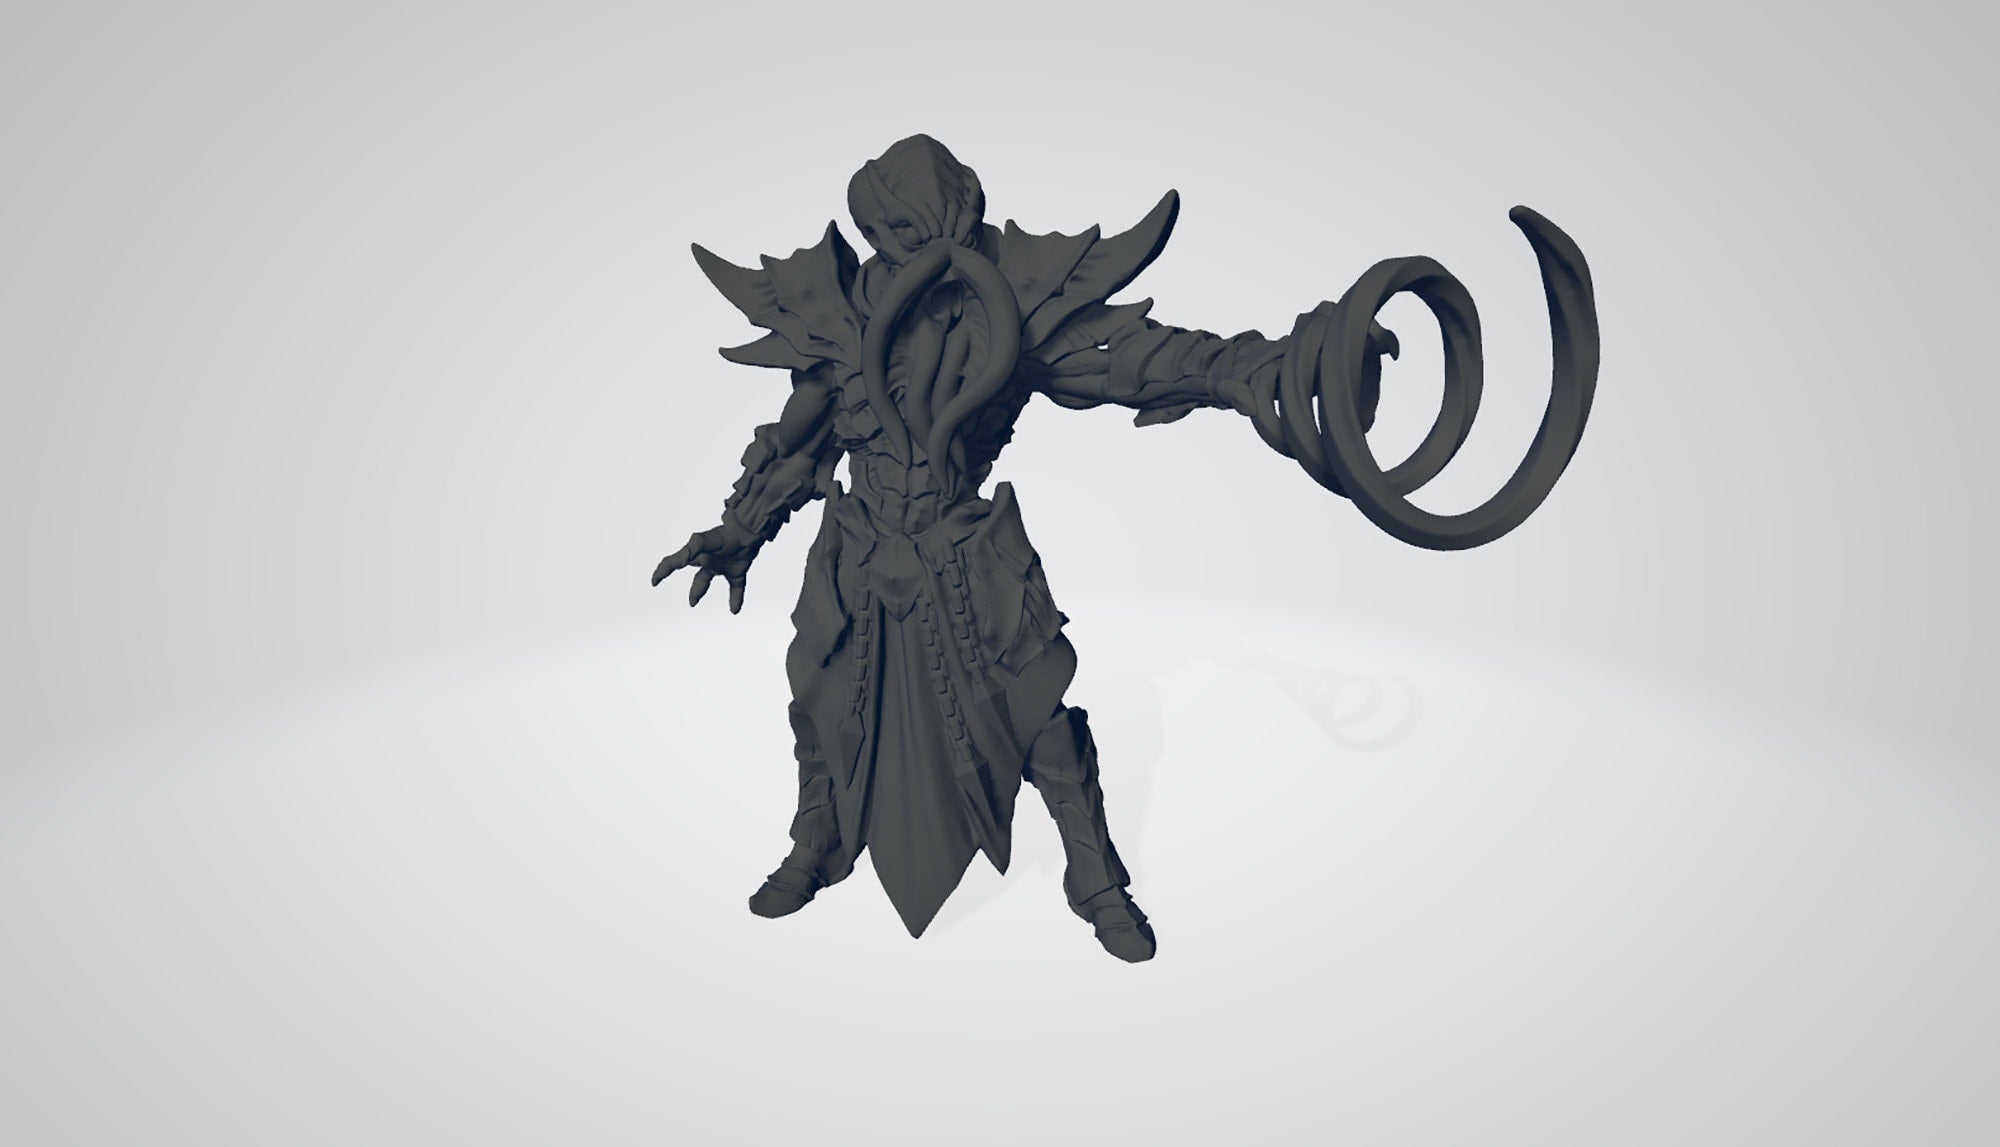 MIND FLAYER Illithid "Psionic"-Role Playing Miniatures